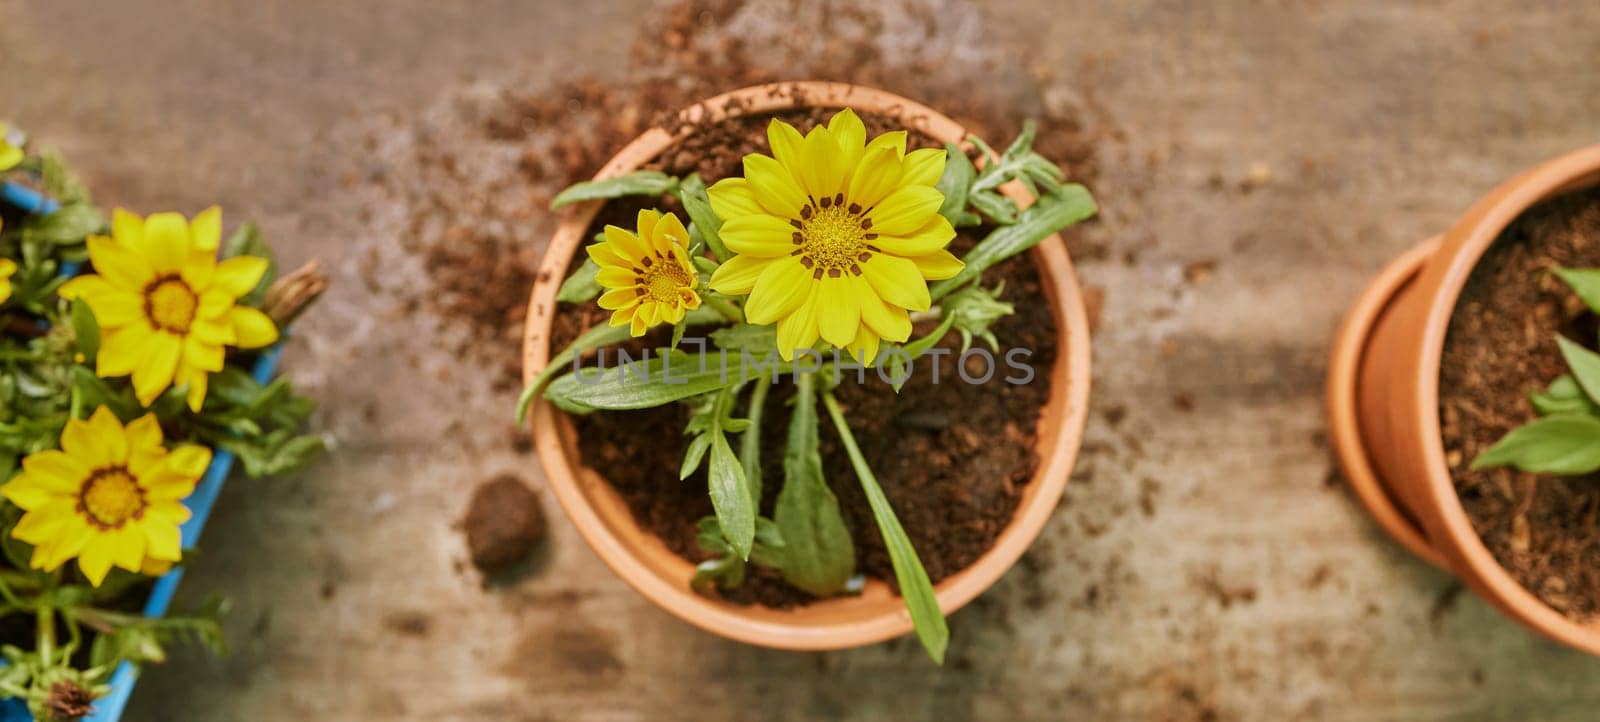 Plant, soil and growth with nature and flower top view, natural and ecology with agriculture and gardening. Botany, dirt and growing with spring, flowers and garden, potted plants and environment